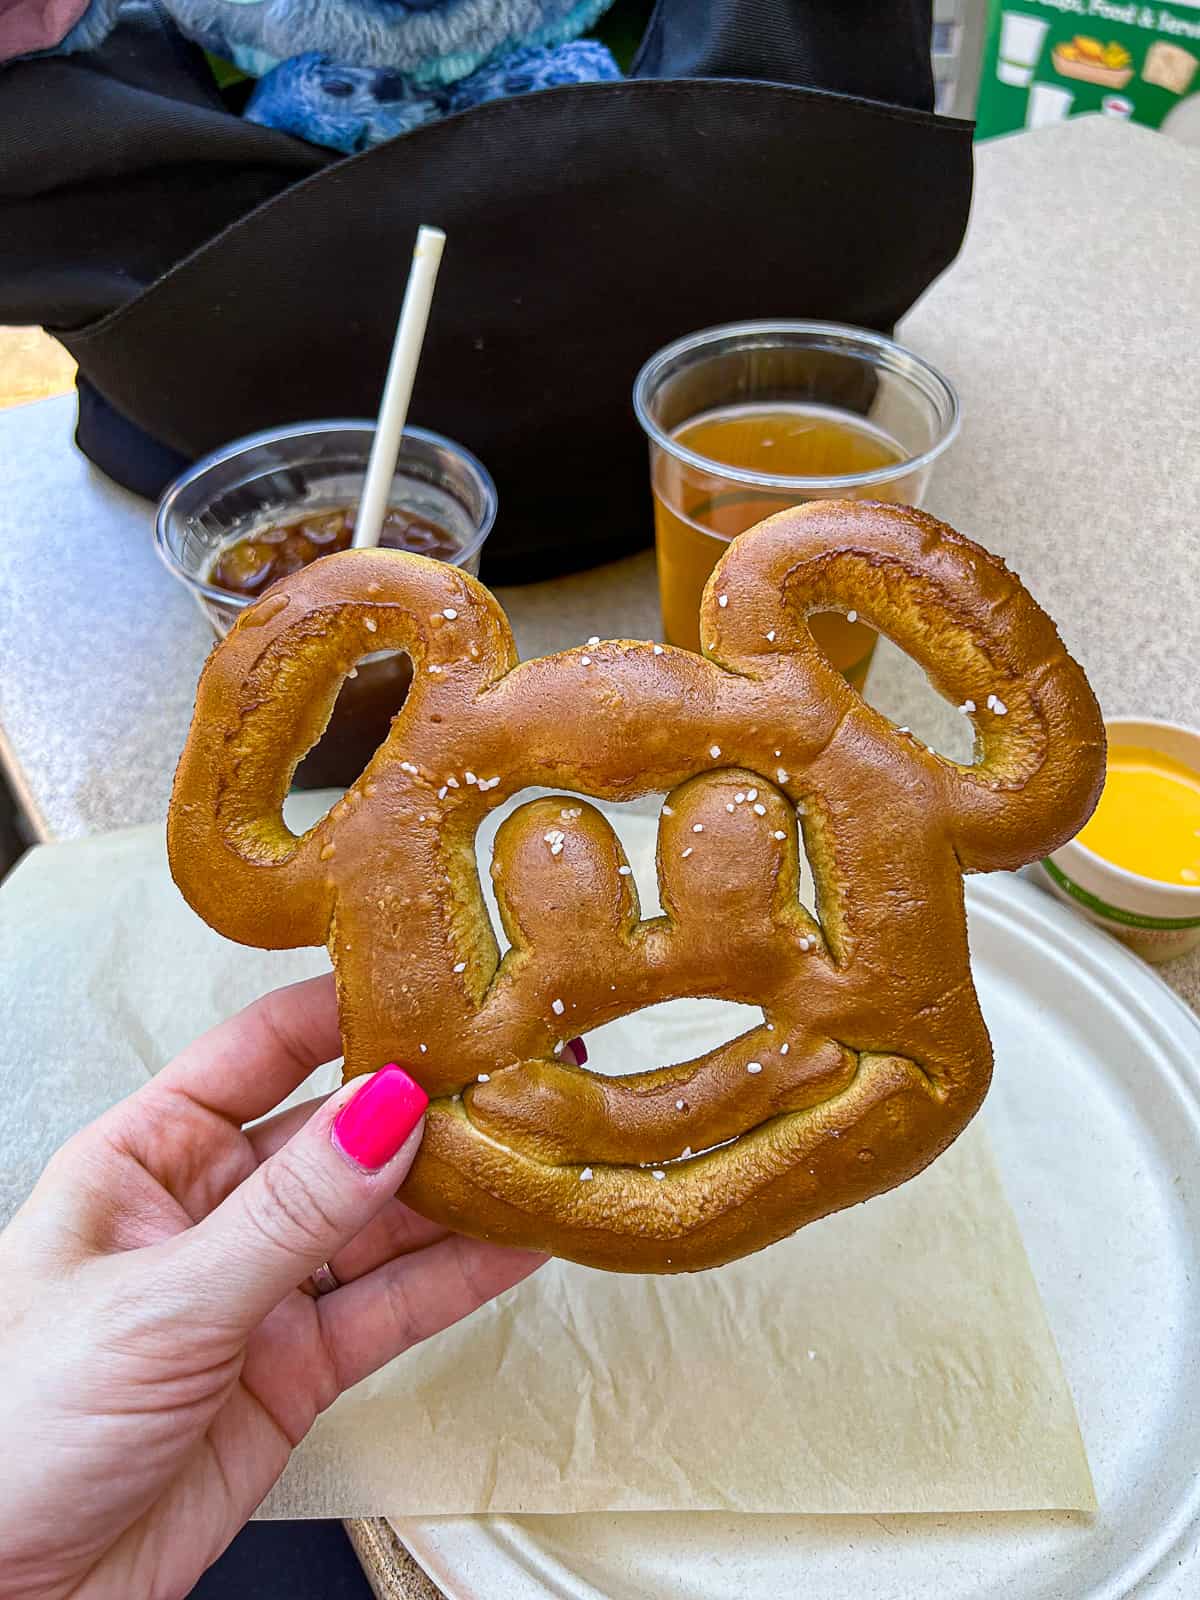 Holding a Mickey Mouse Pretzel from Disney World Resort